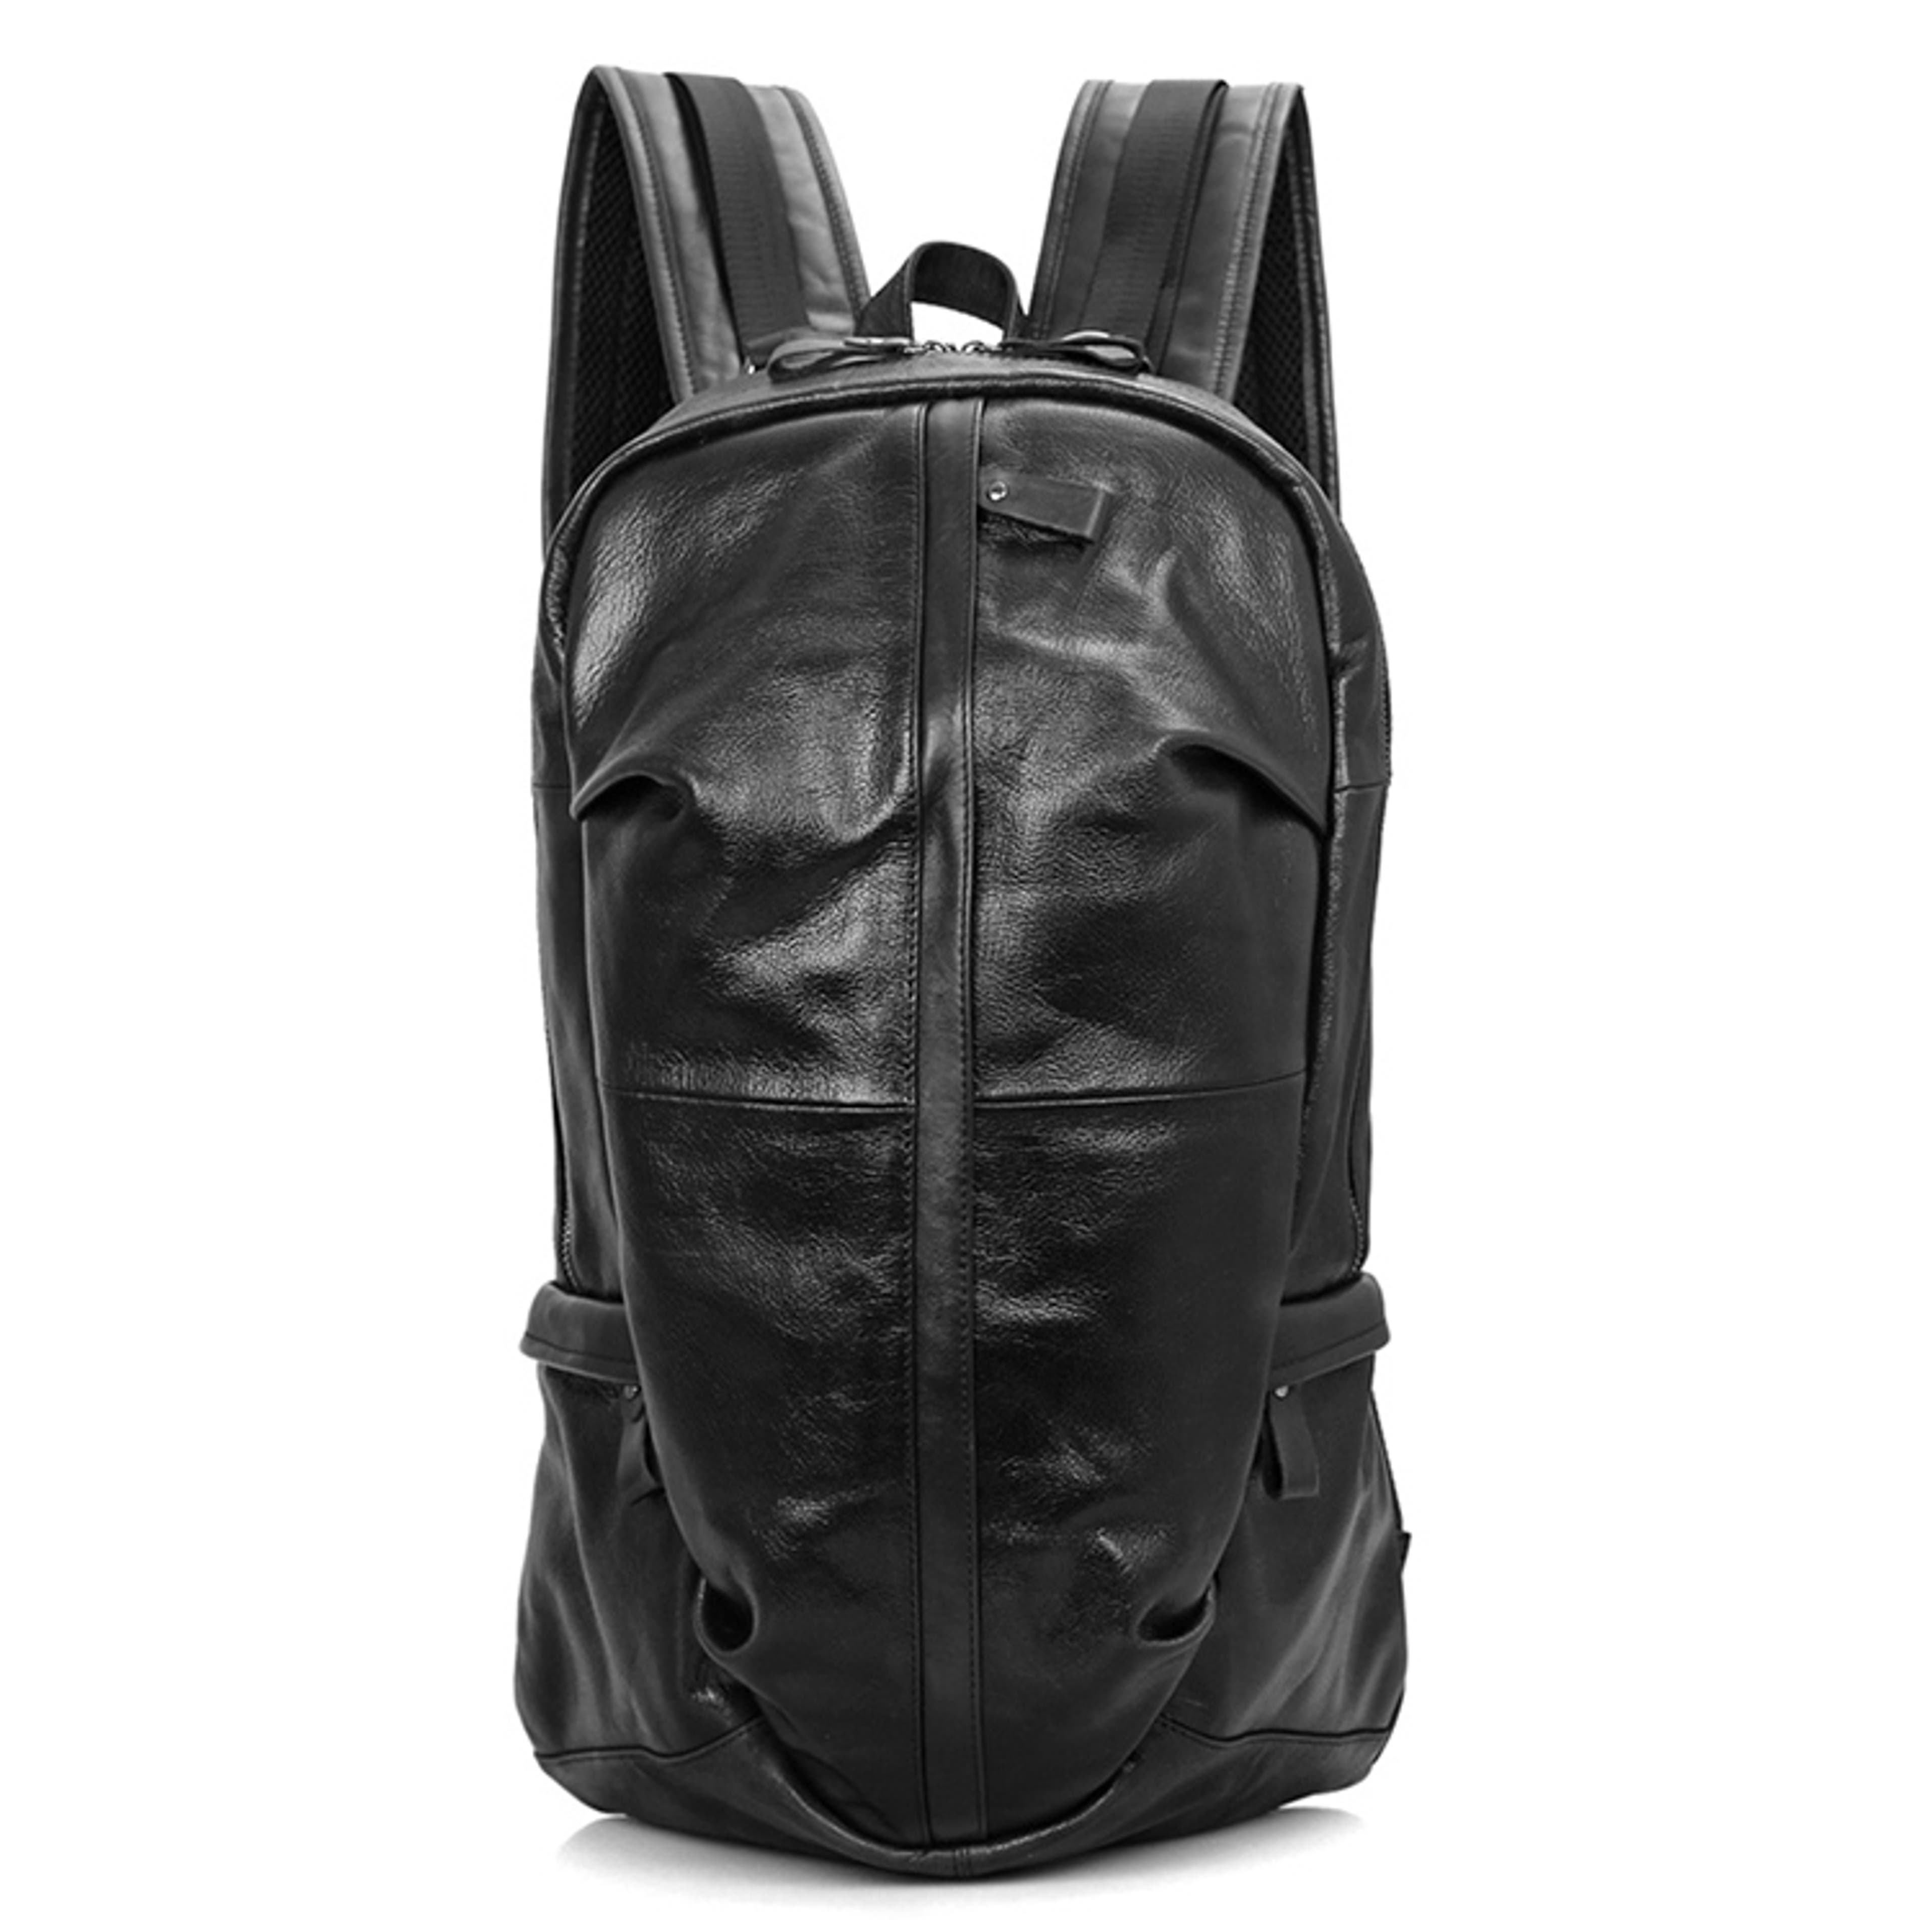 Thin Black Leather Backpack